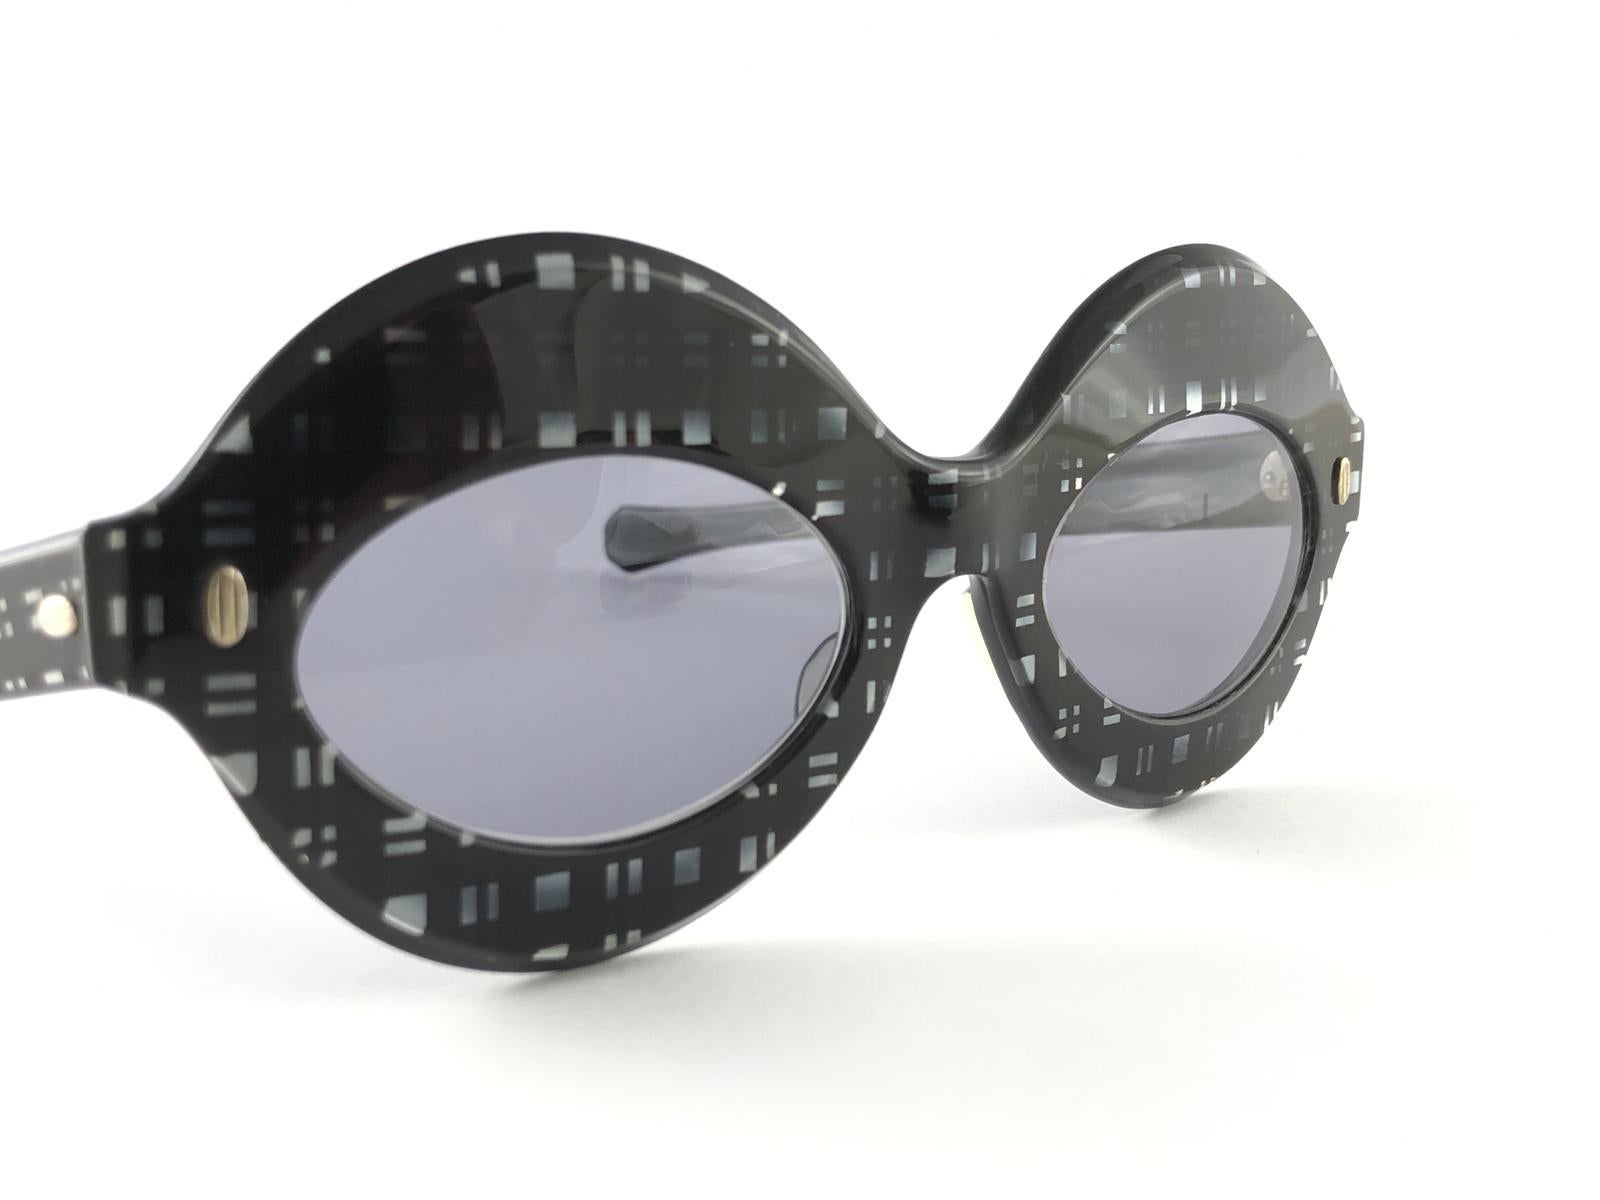 New Vintage Pompeii Chequered Made in Italy Sunglasses, 1970   In New Condition For Sale In Baleares, Baleares